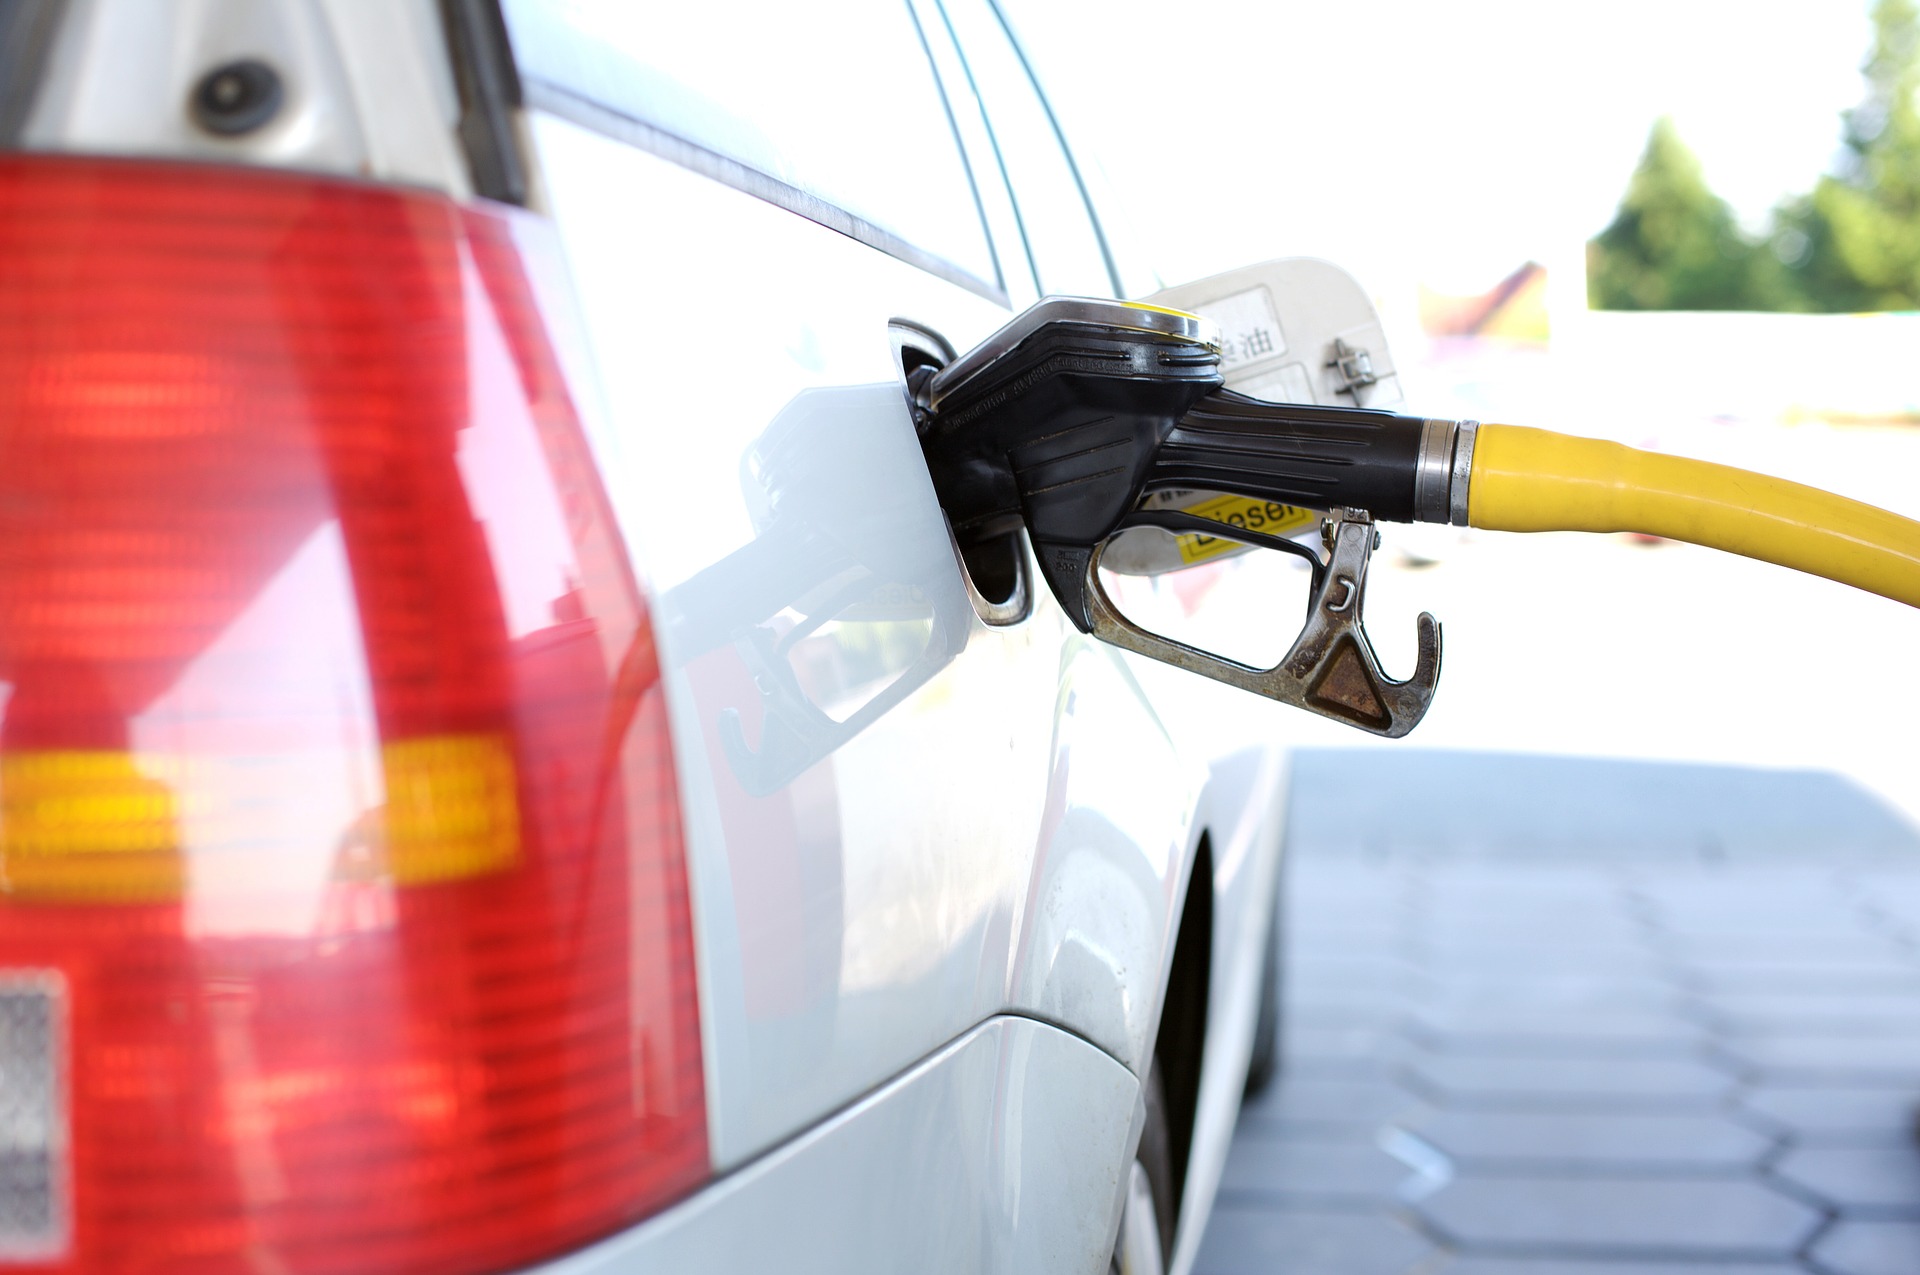 Fuel price rollback tomorrow July 5, possible PHP 0.10 gas, PHP 2.80 – 2.90 diesel